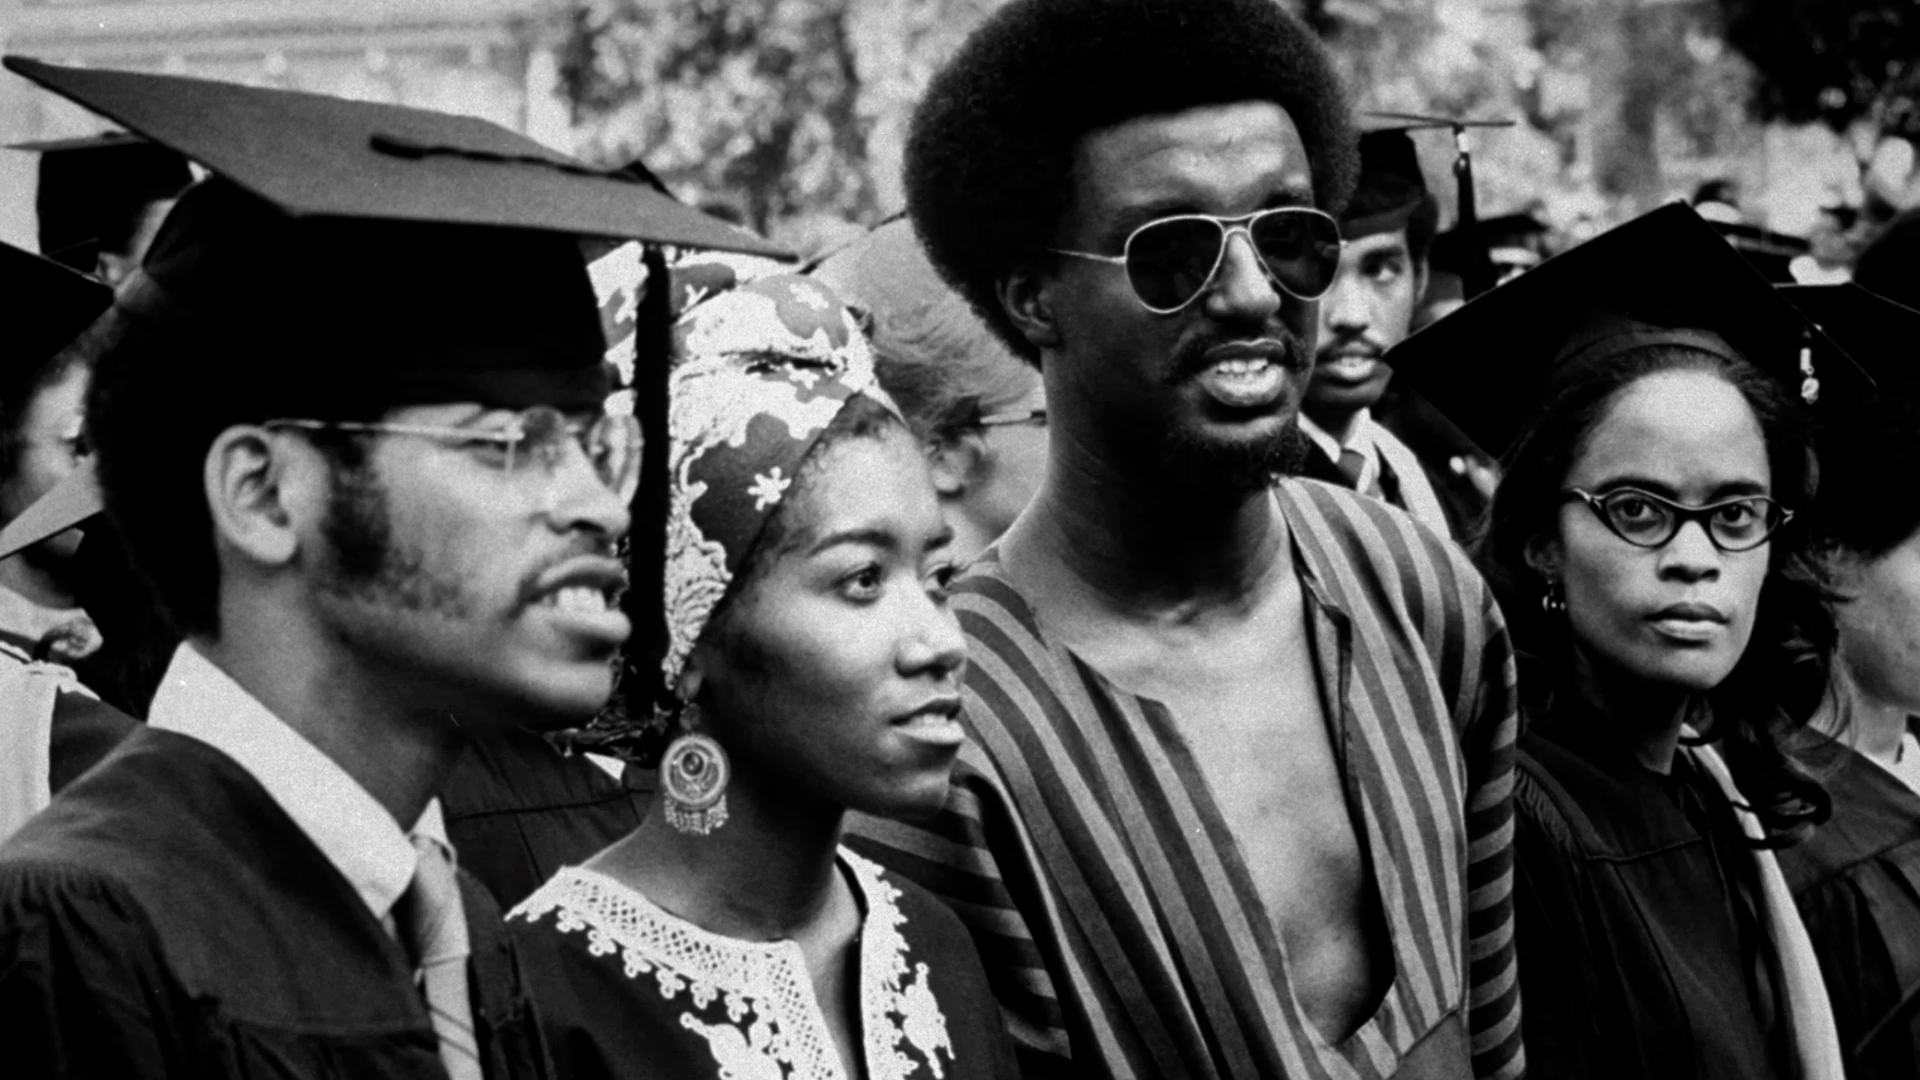 Historically Black Colleges and Universities | Making Black America | PBS LearningMedia